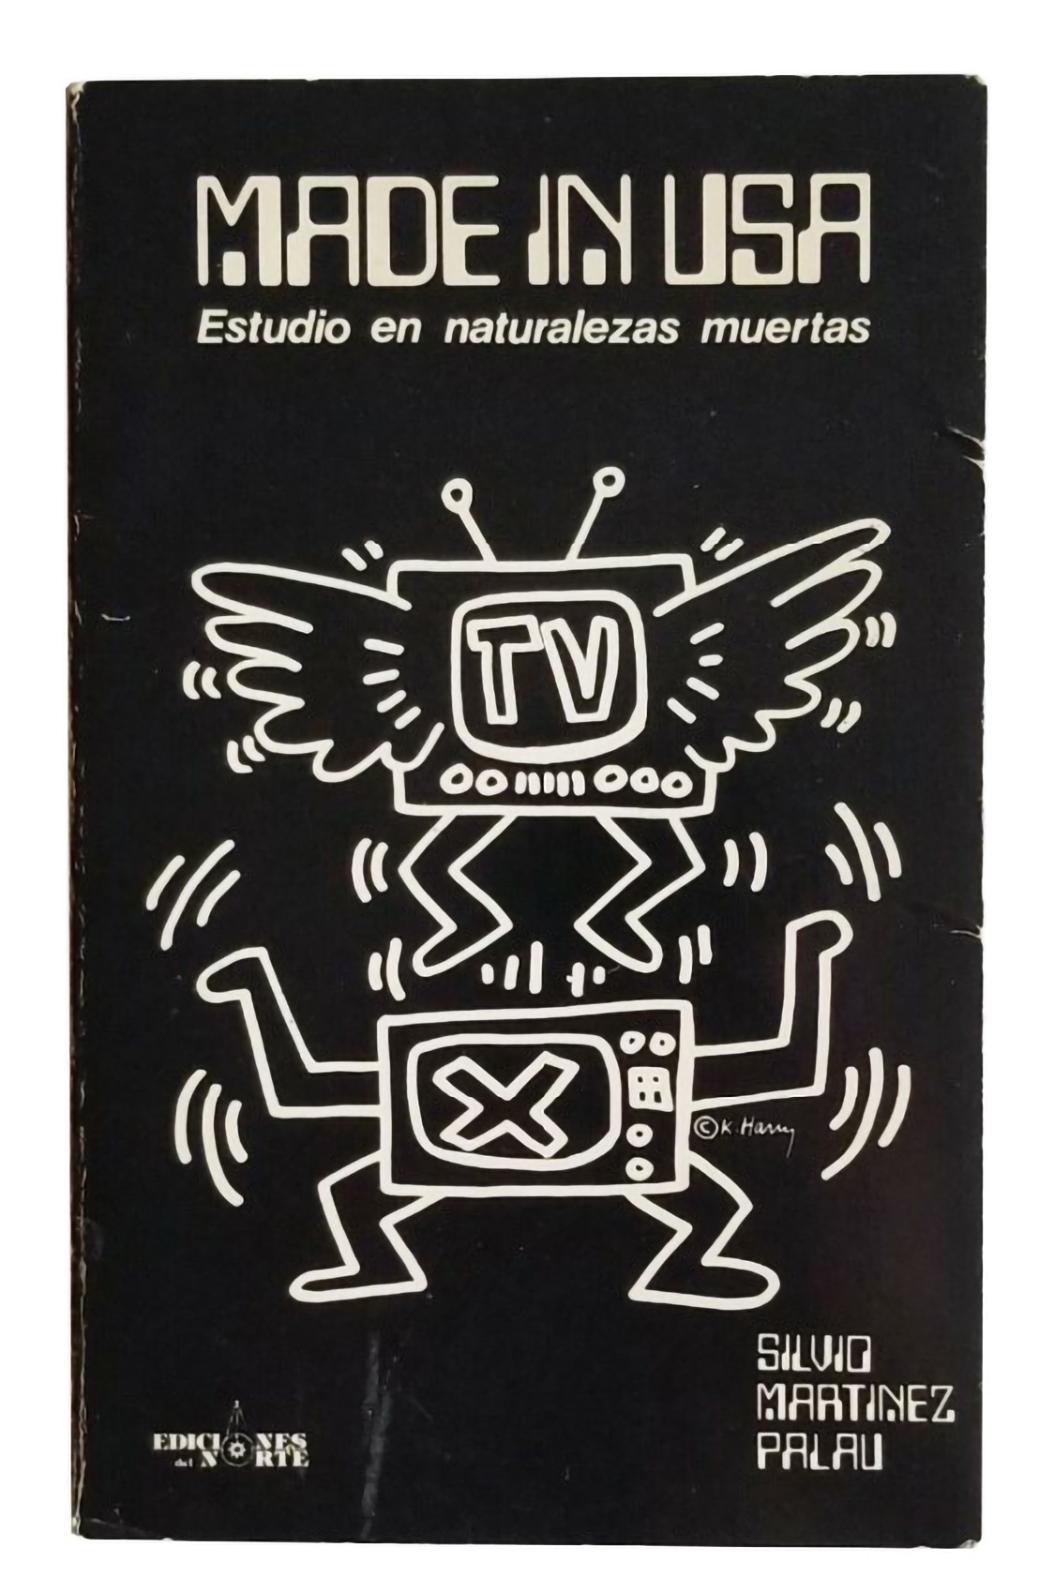 Keith Haring Cover Art 1986:
A rare highly collectible 1986 art publication featuring standout cover art by Keith Haring.

Offset printed cover art and interior illustrations; softcover; 150+ pages. Text in Spanish.

Approximately 6x8 inches.

Some